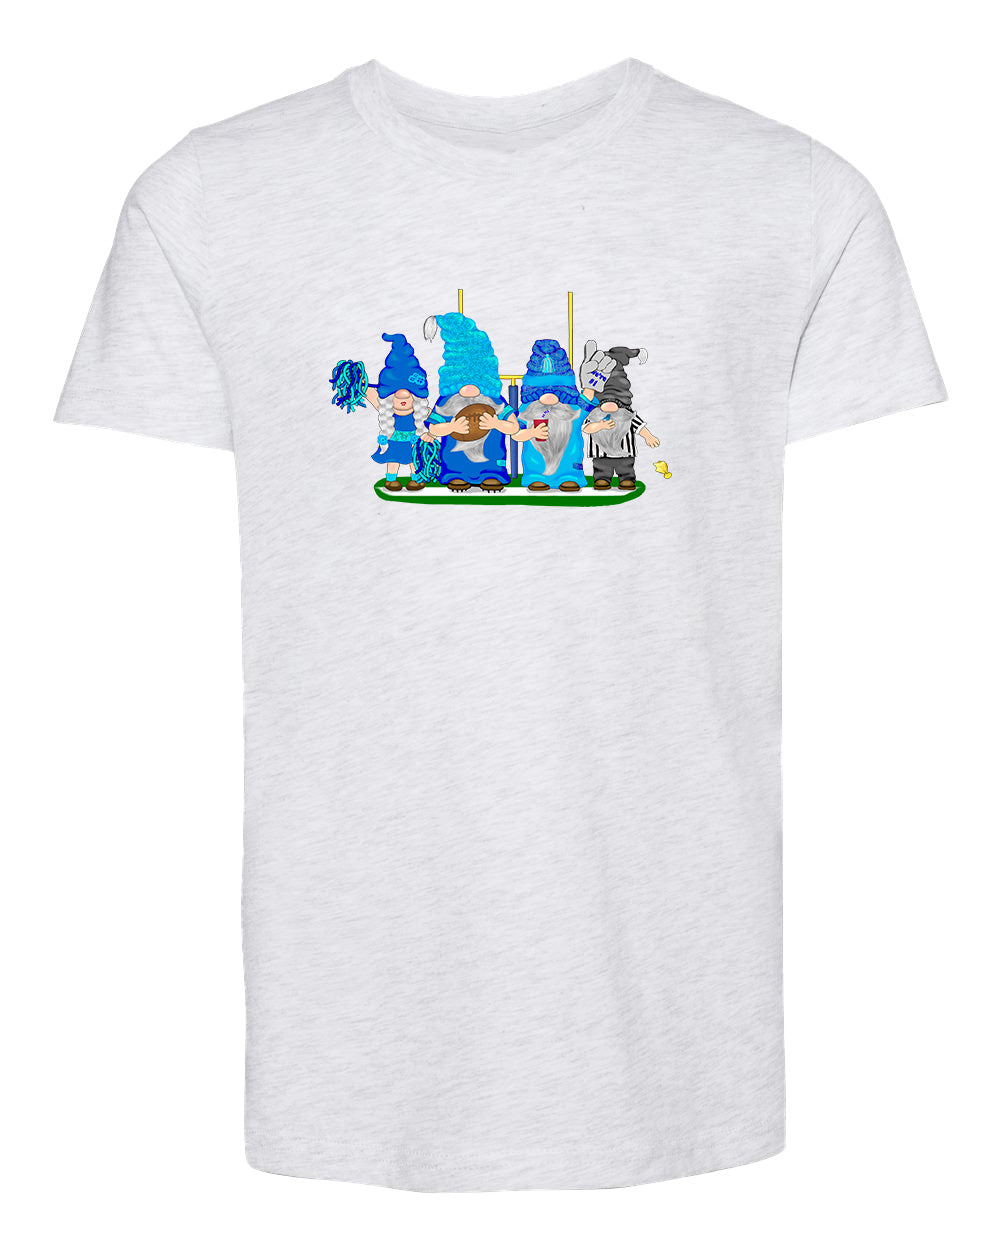 Navy & Blue Football Gnomes  (similar to Tennessee) on Kids T-shirt